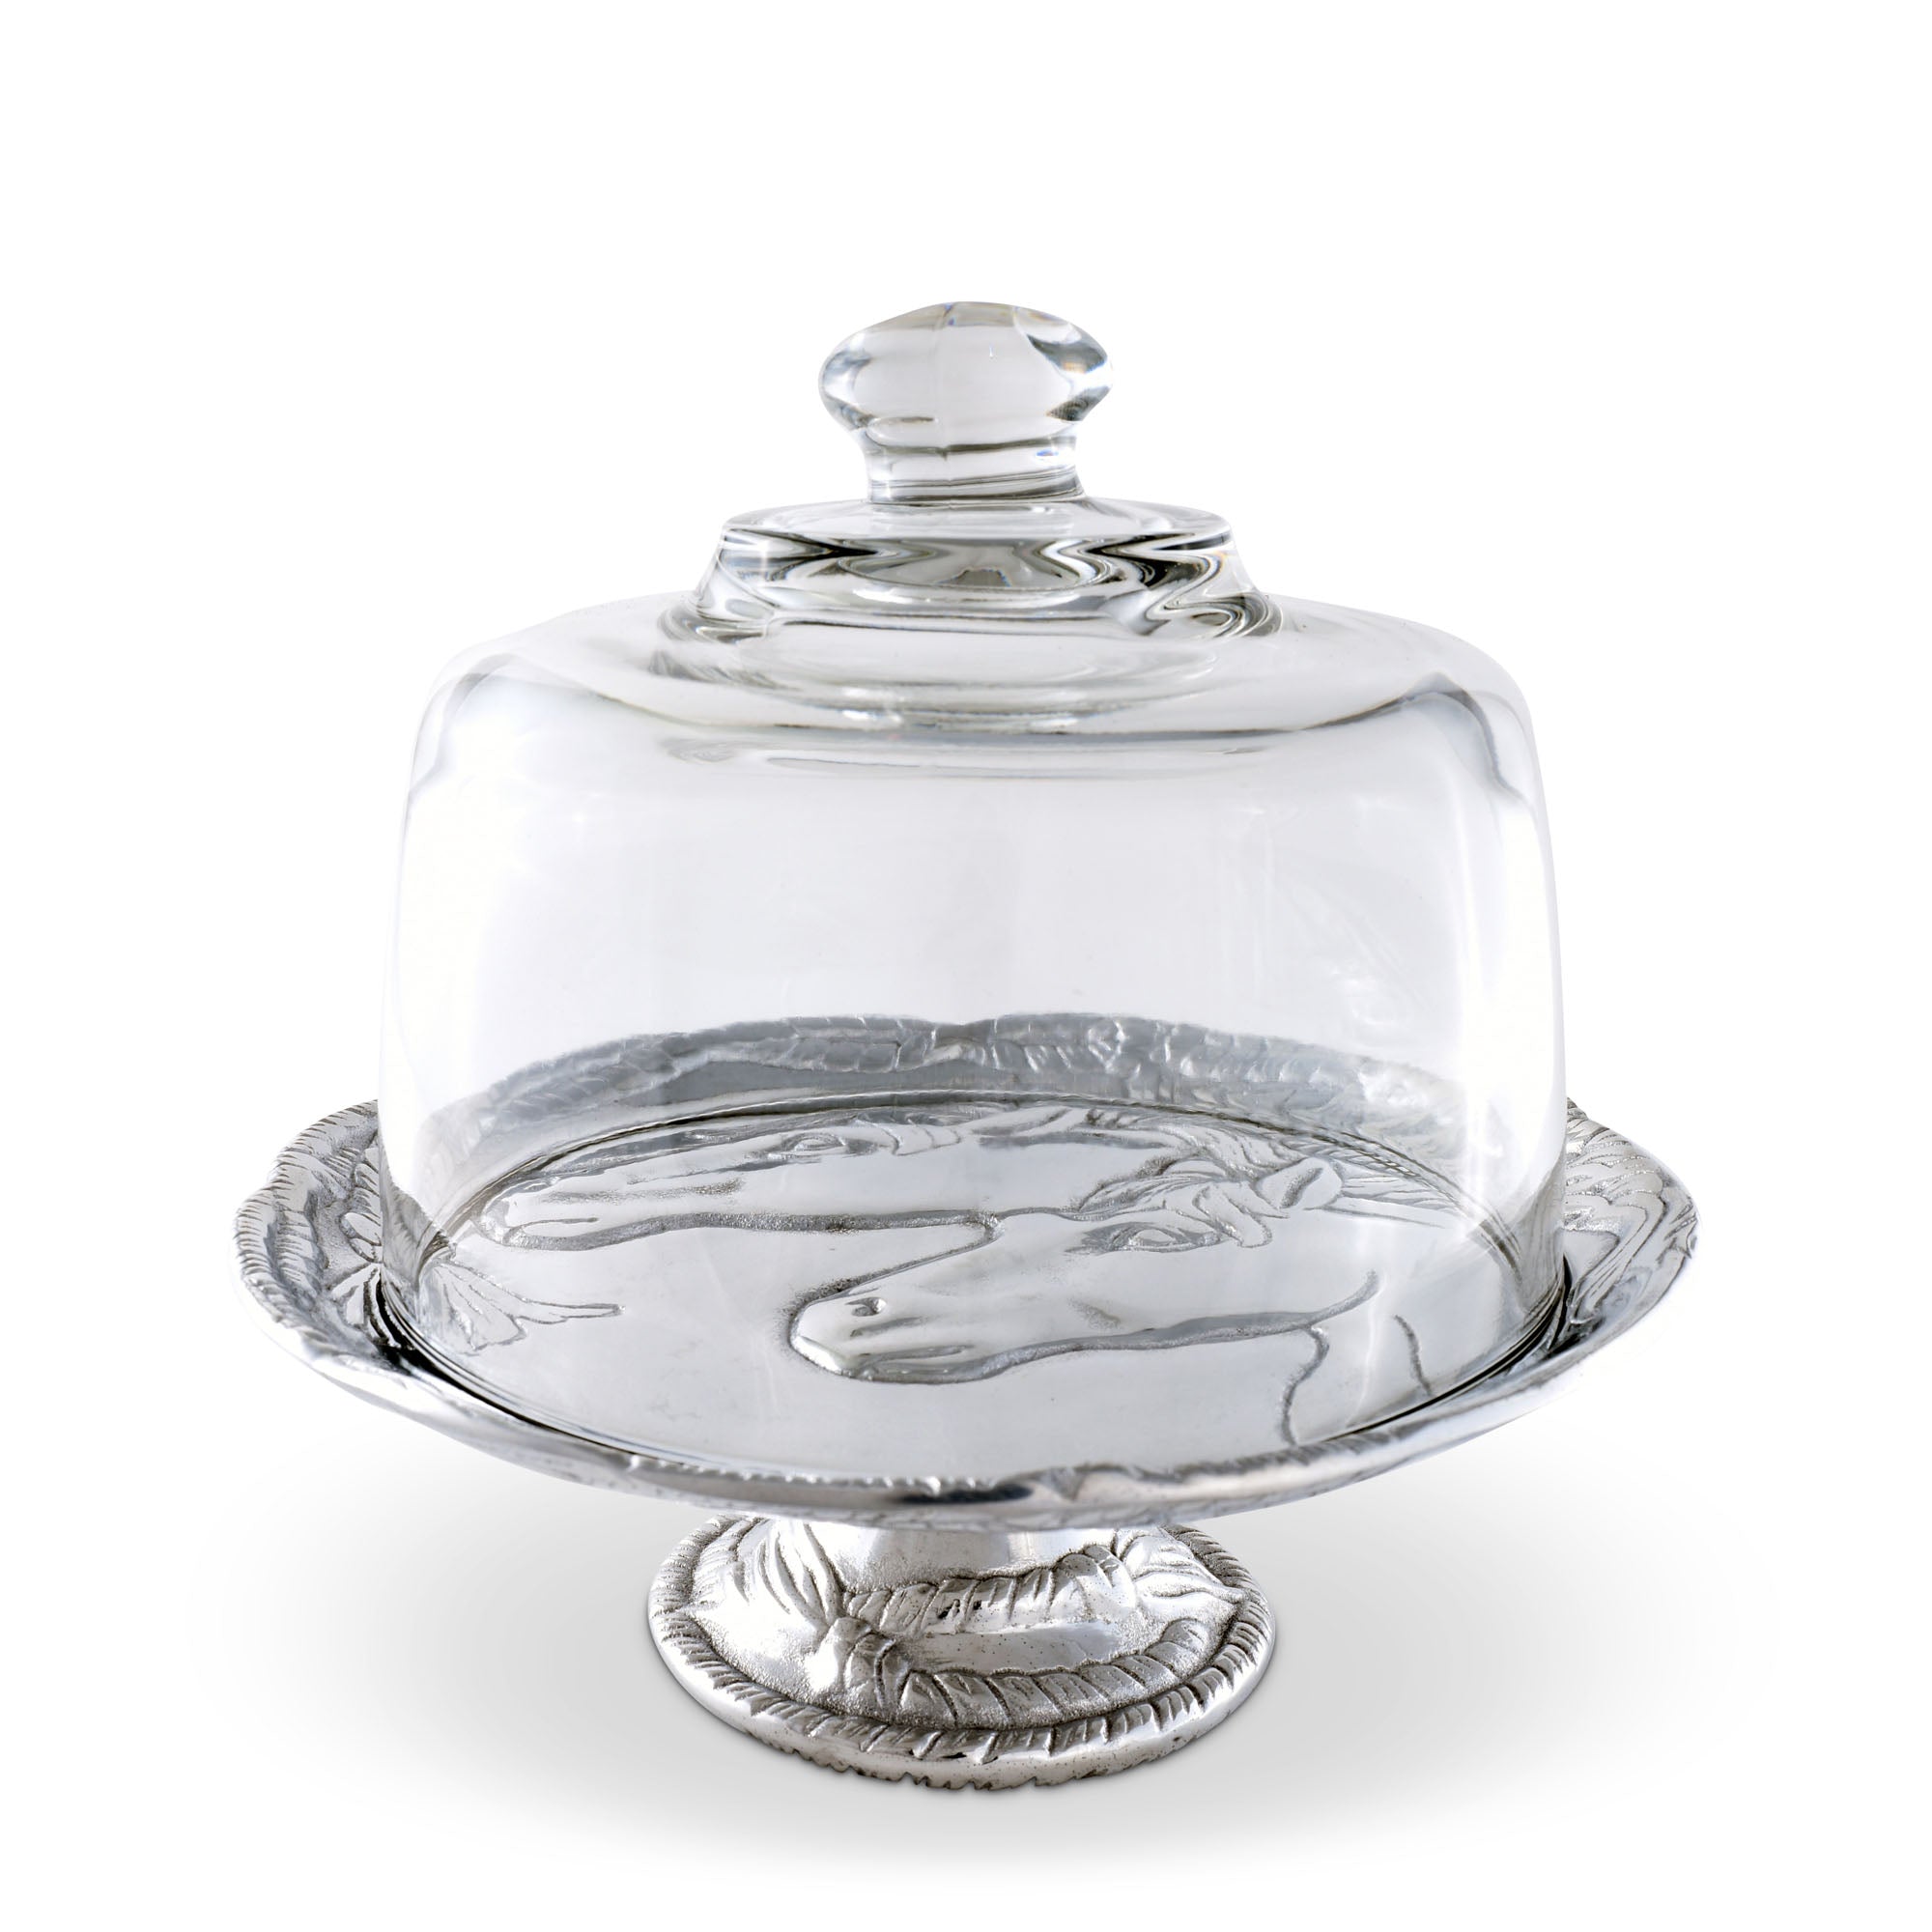 Arthur Court Horse Plate with Glass Dome Product Image